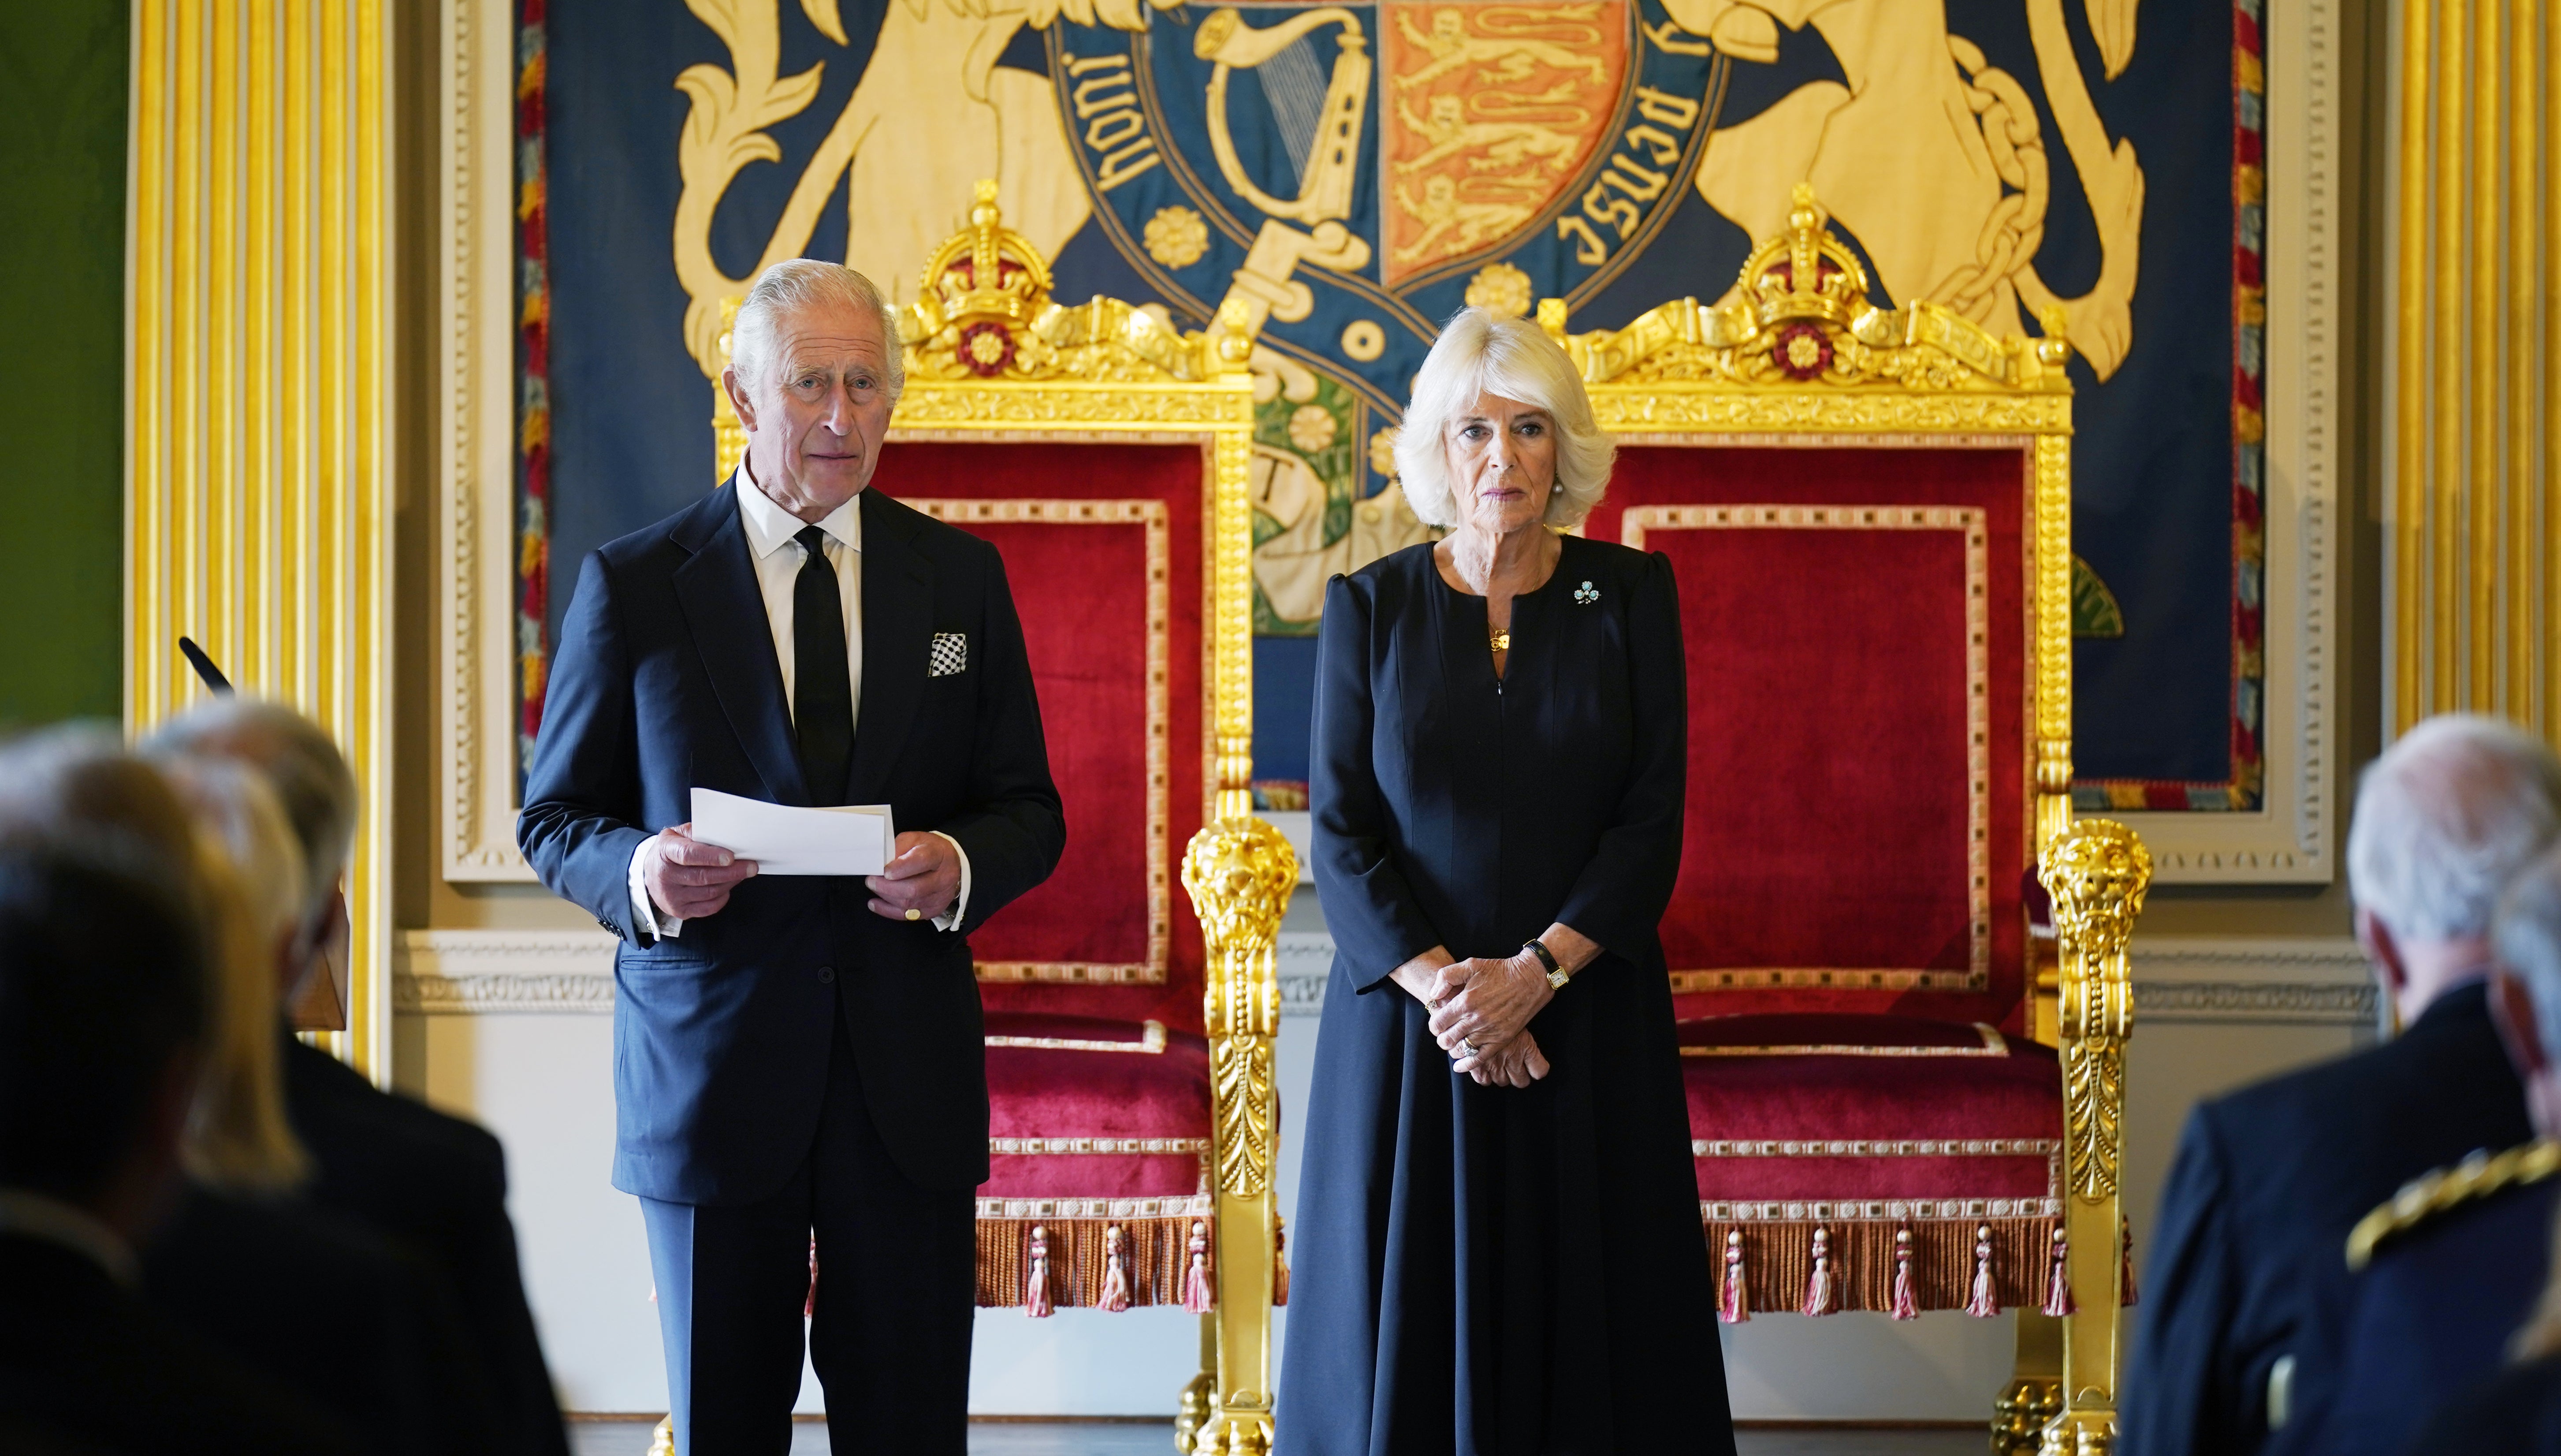 King Charles III and the Queen Consort receive a Message of Condolence by the Speaker of the Northern Ireland Assembly at Hillsborough Castle (Niall Carson/PA)